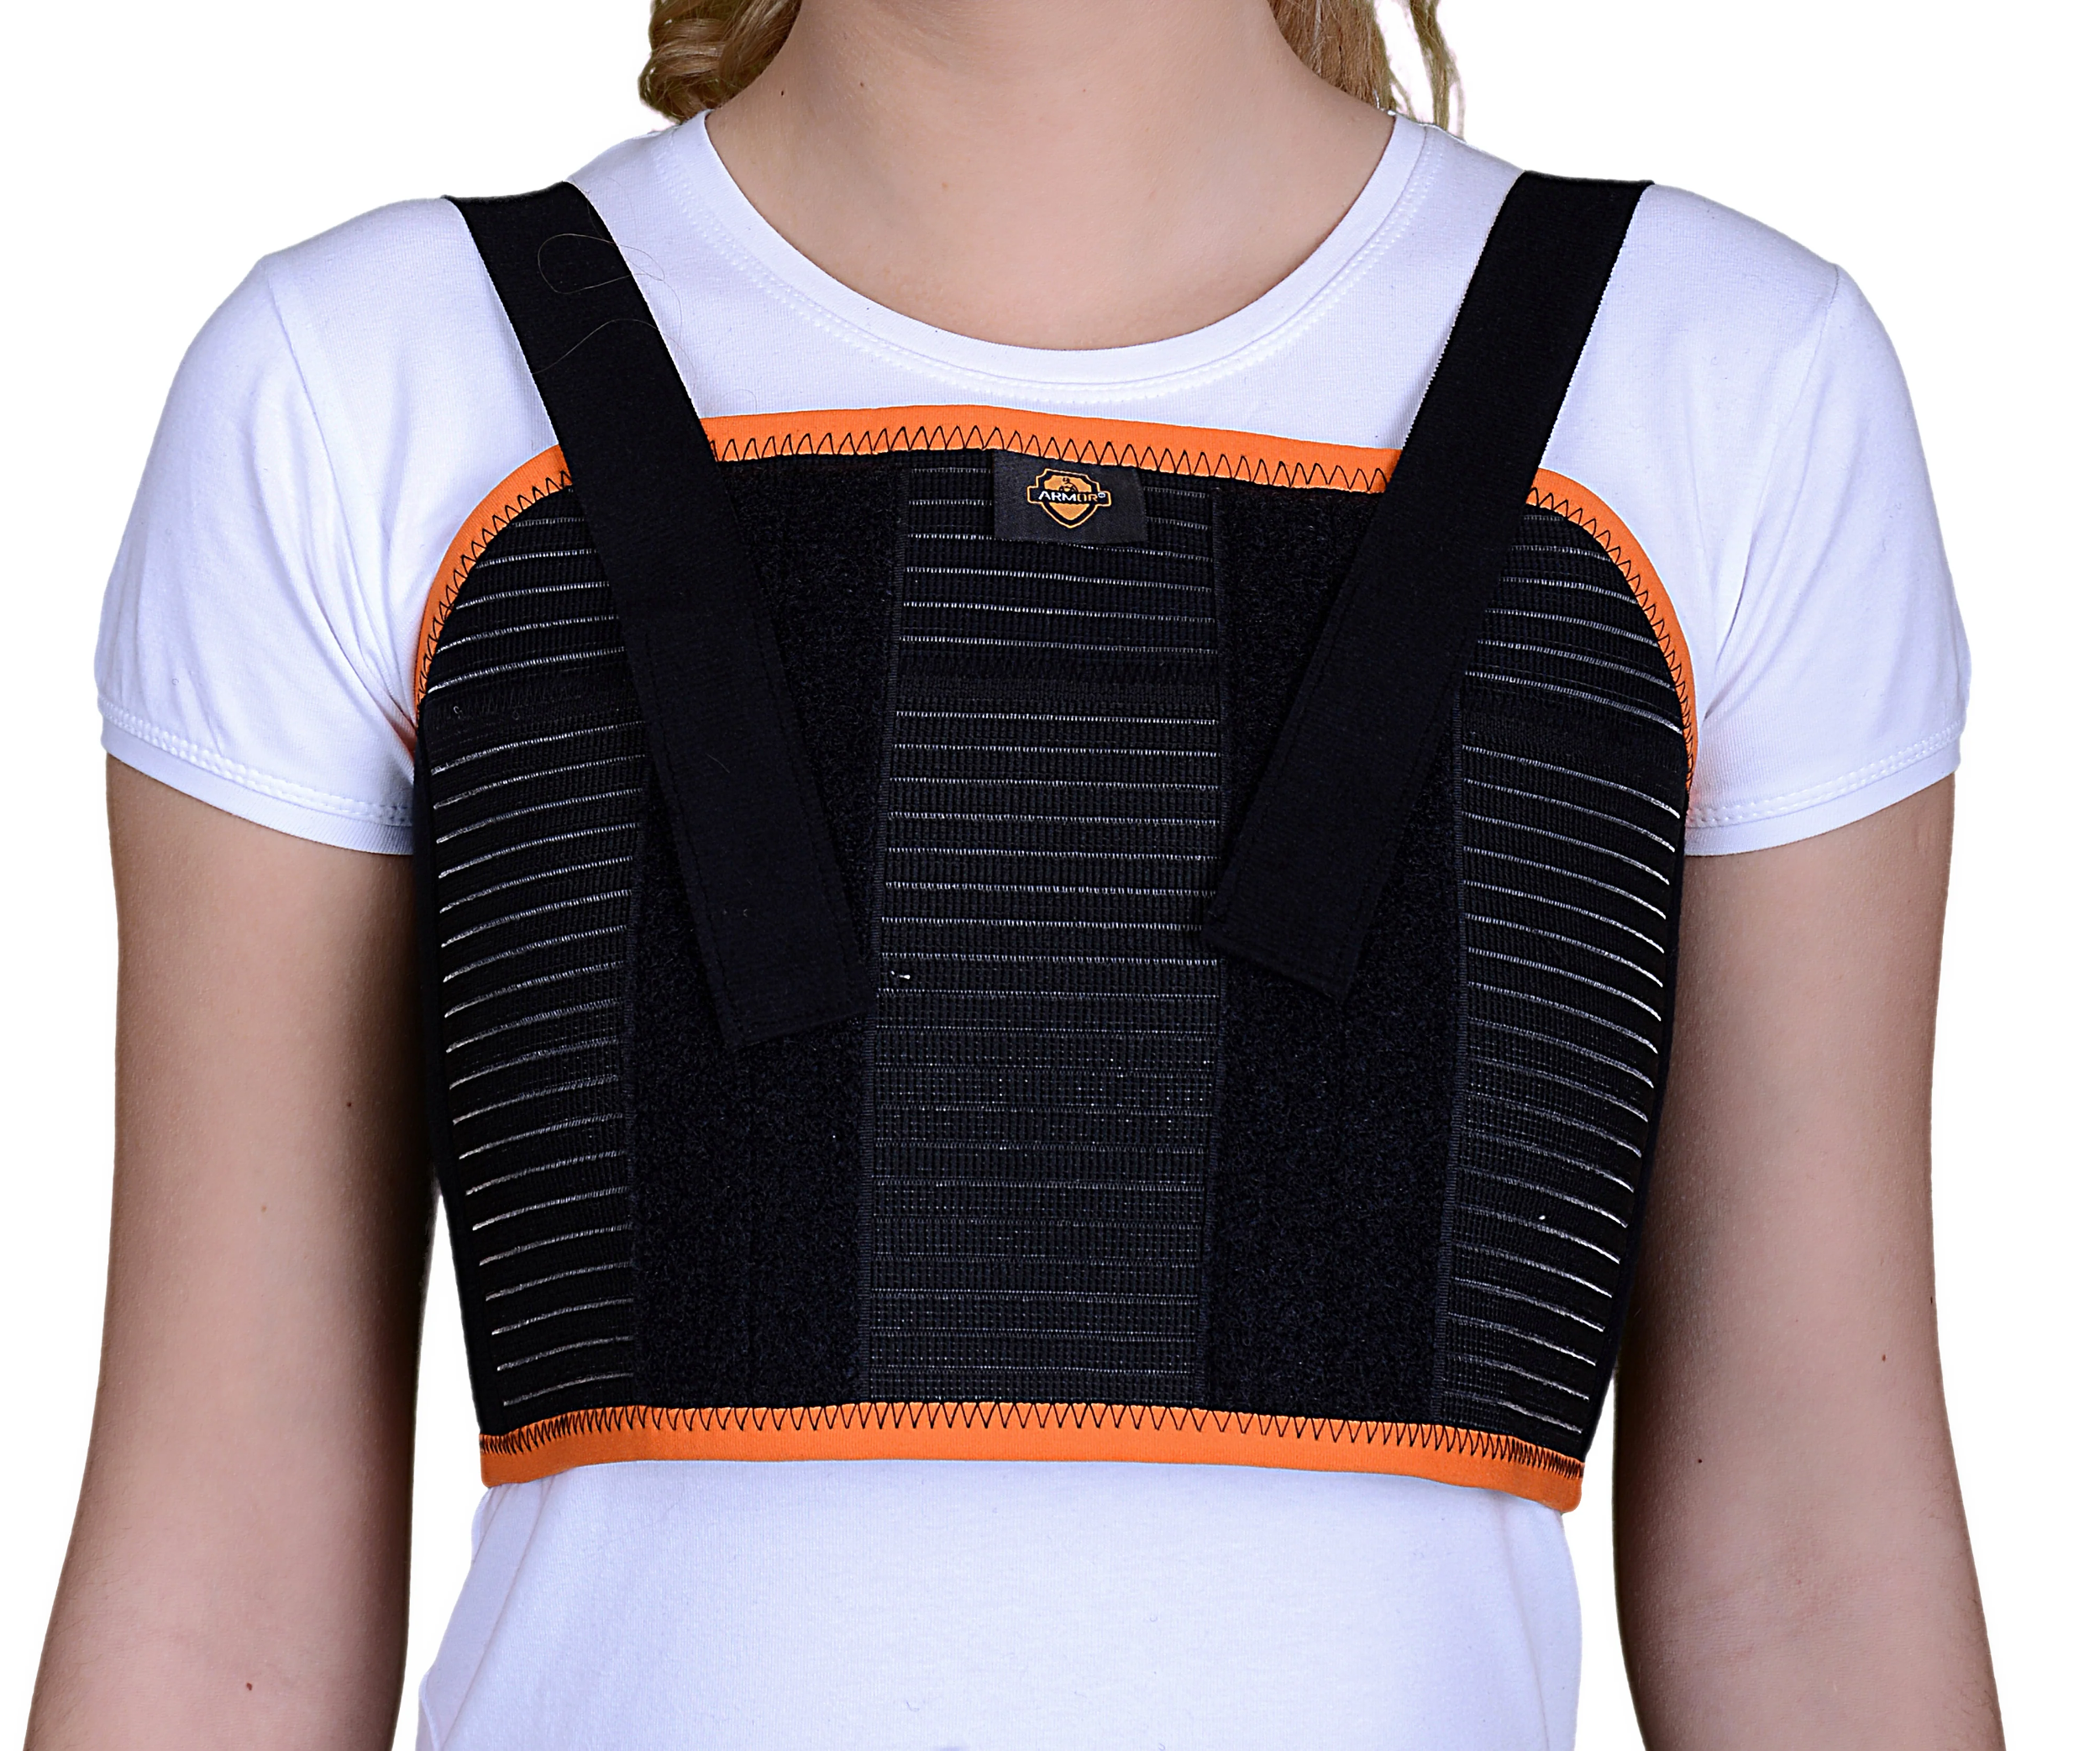 Thorax Support Chest Brace Breathable Elastic Adjustable Protective